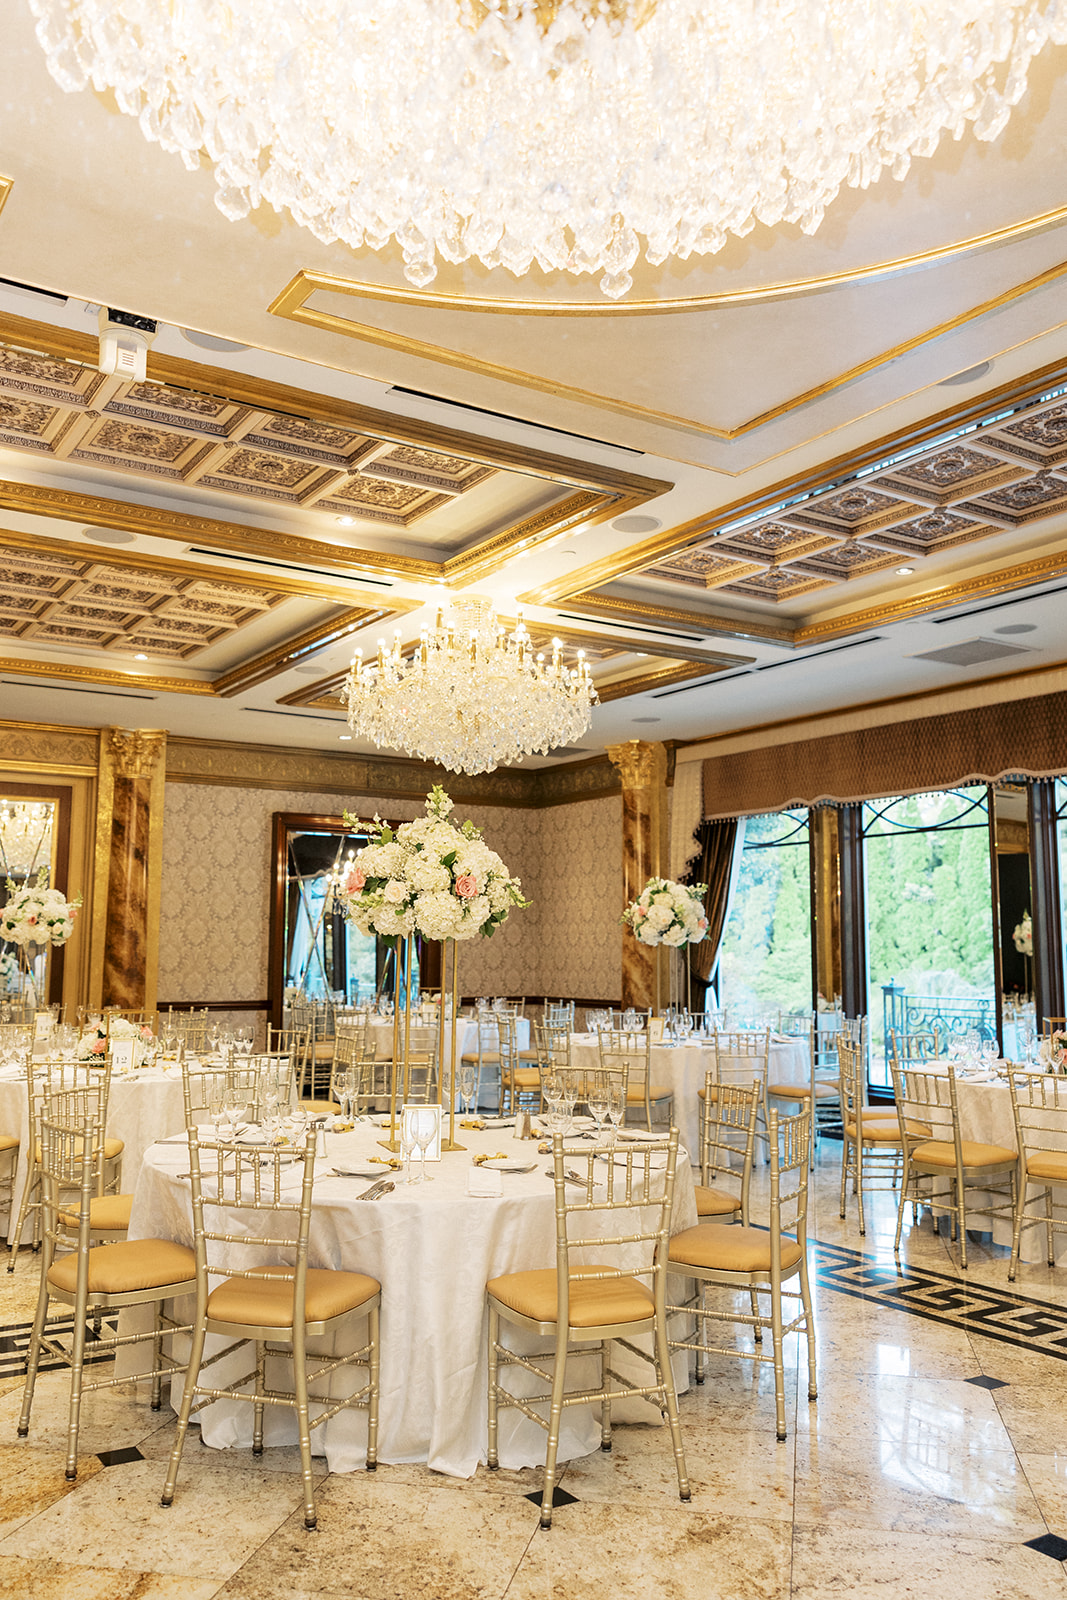 A wedding reception set up with gold chairs and white linens under large chandeliers